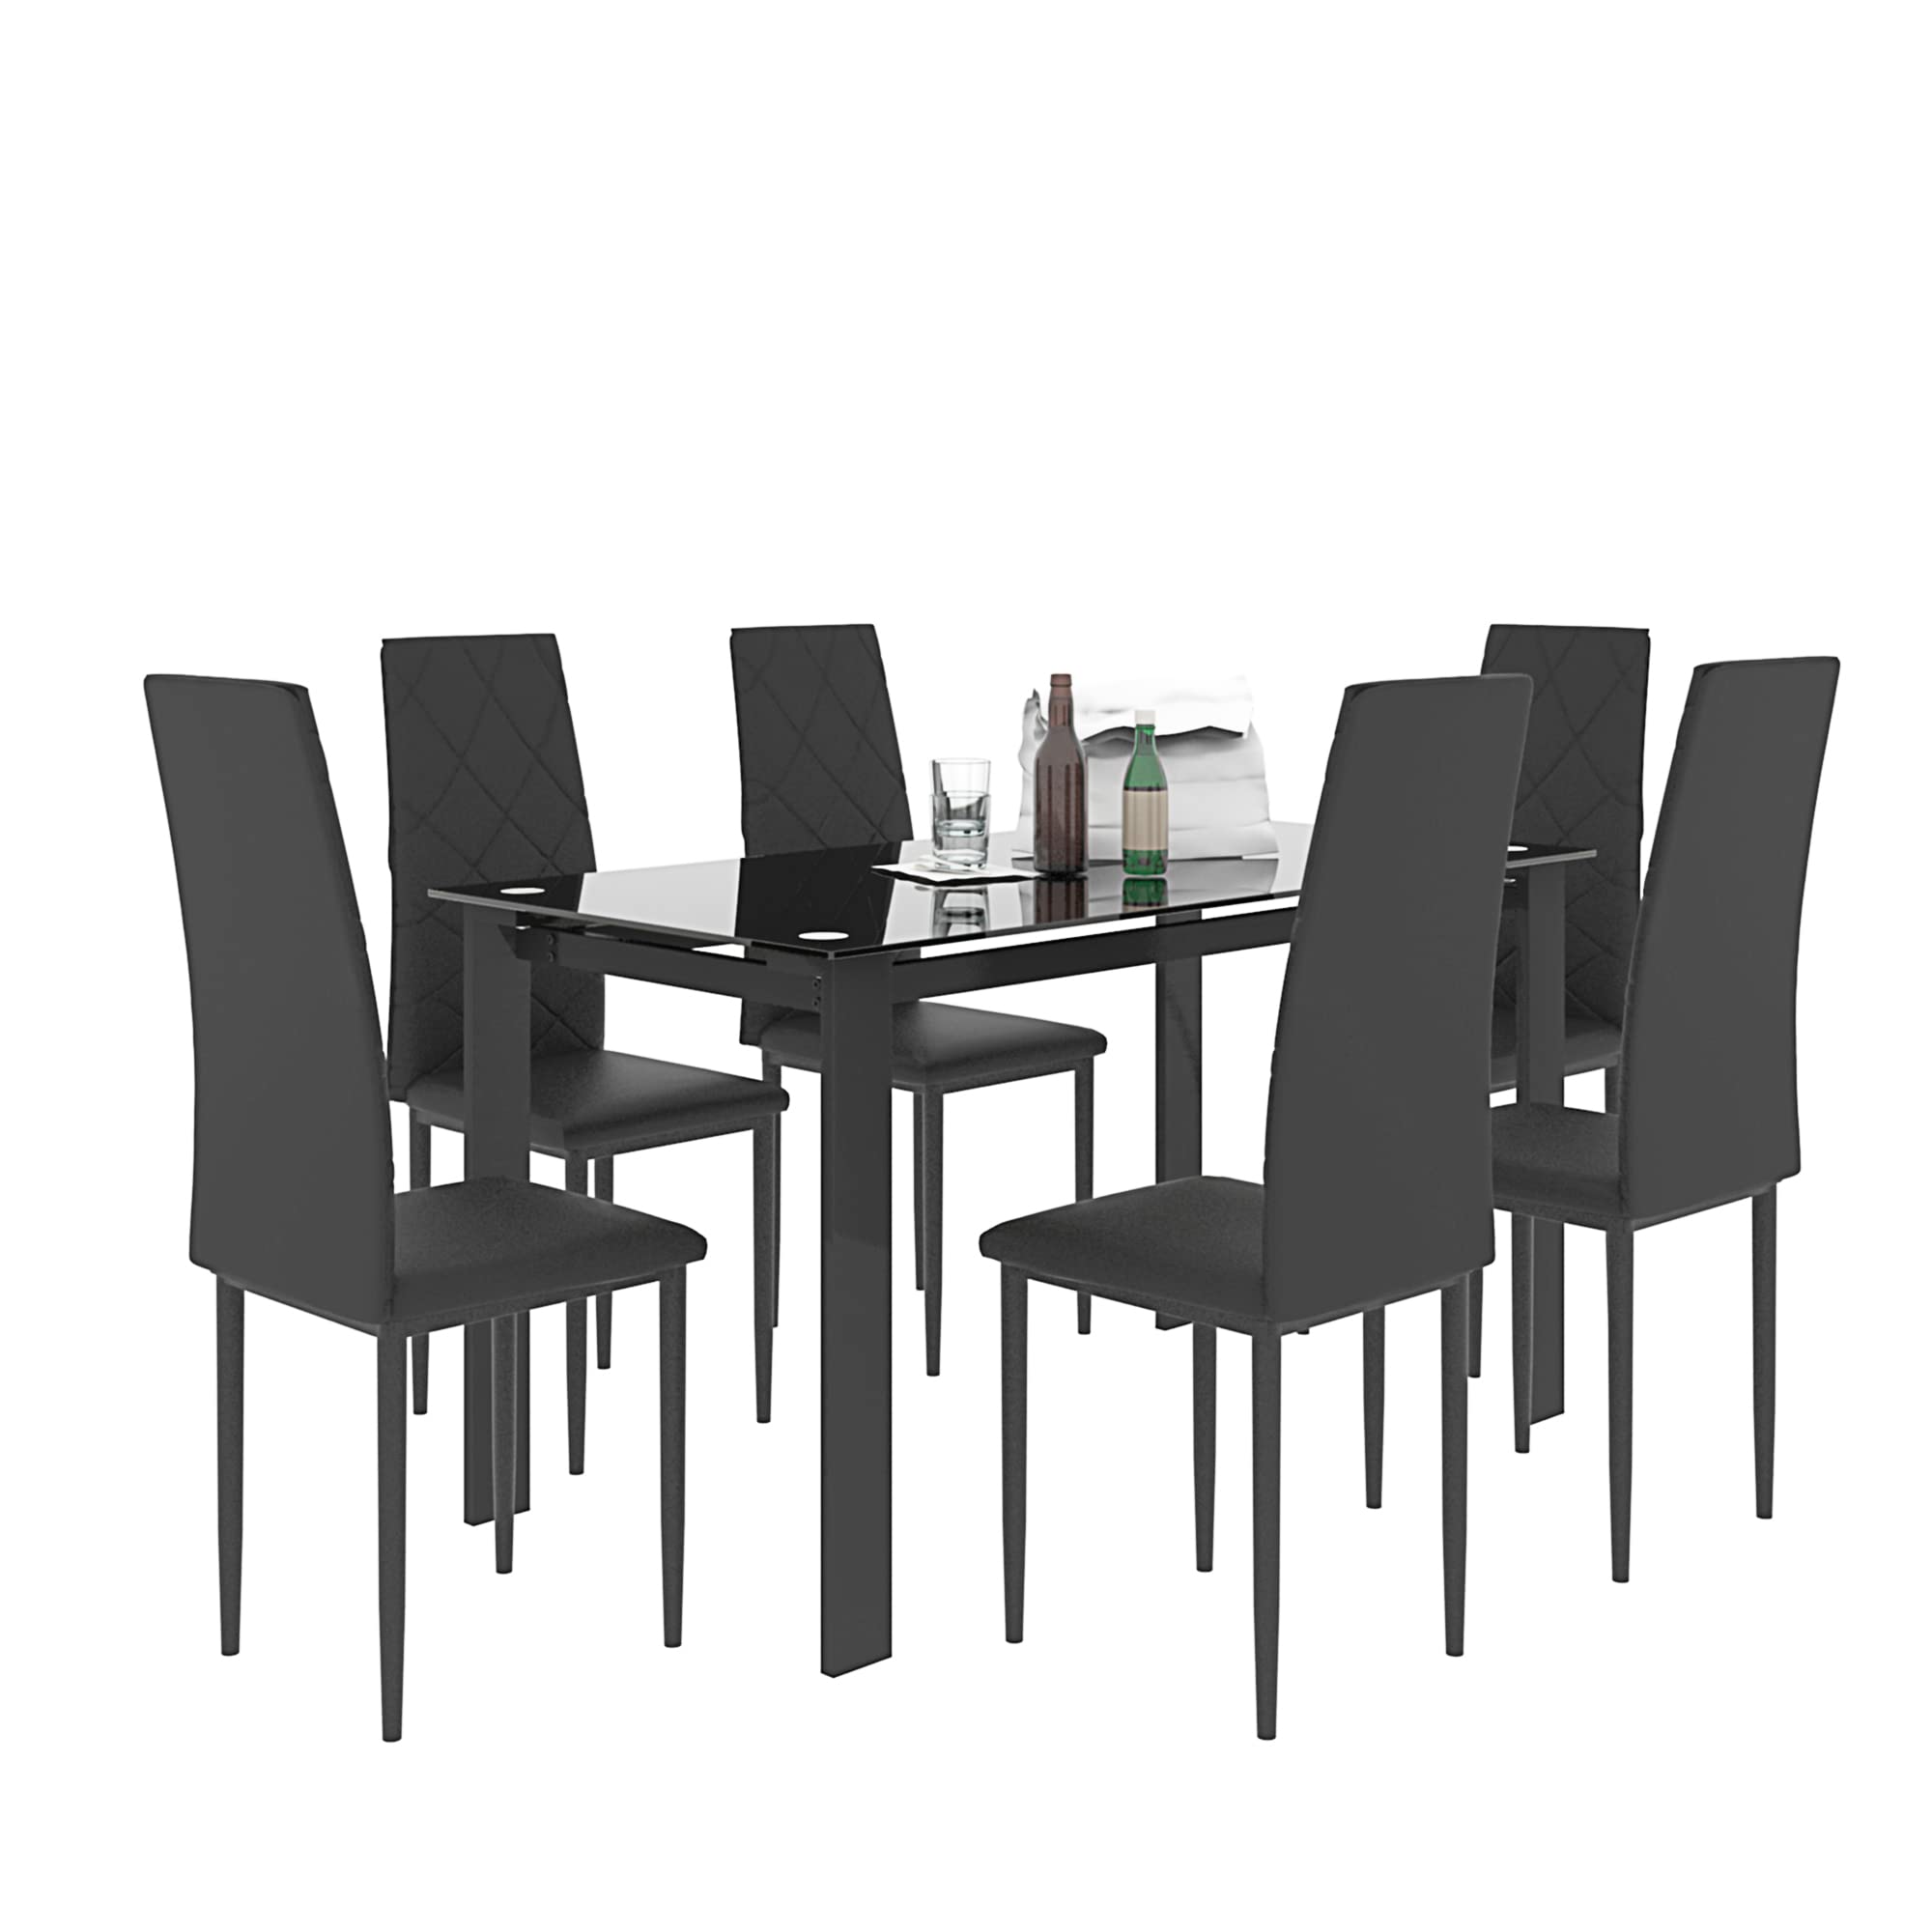 Best Black Dining Chairs You Can Buy Online